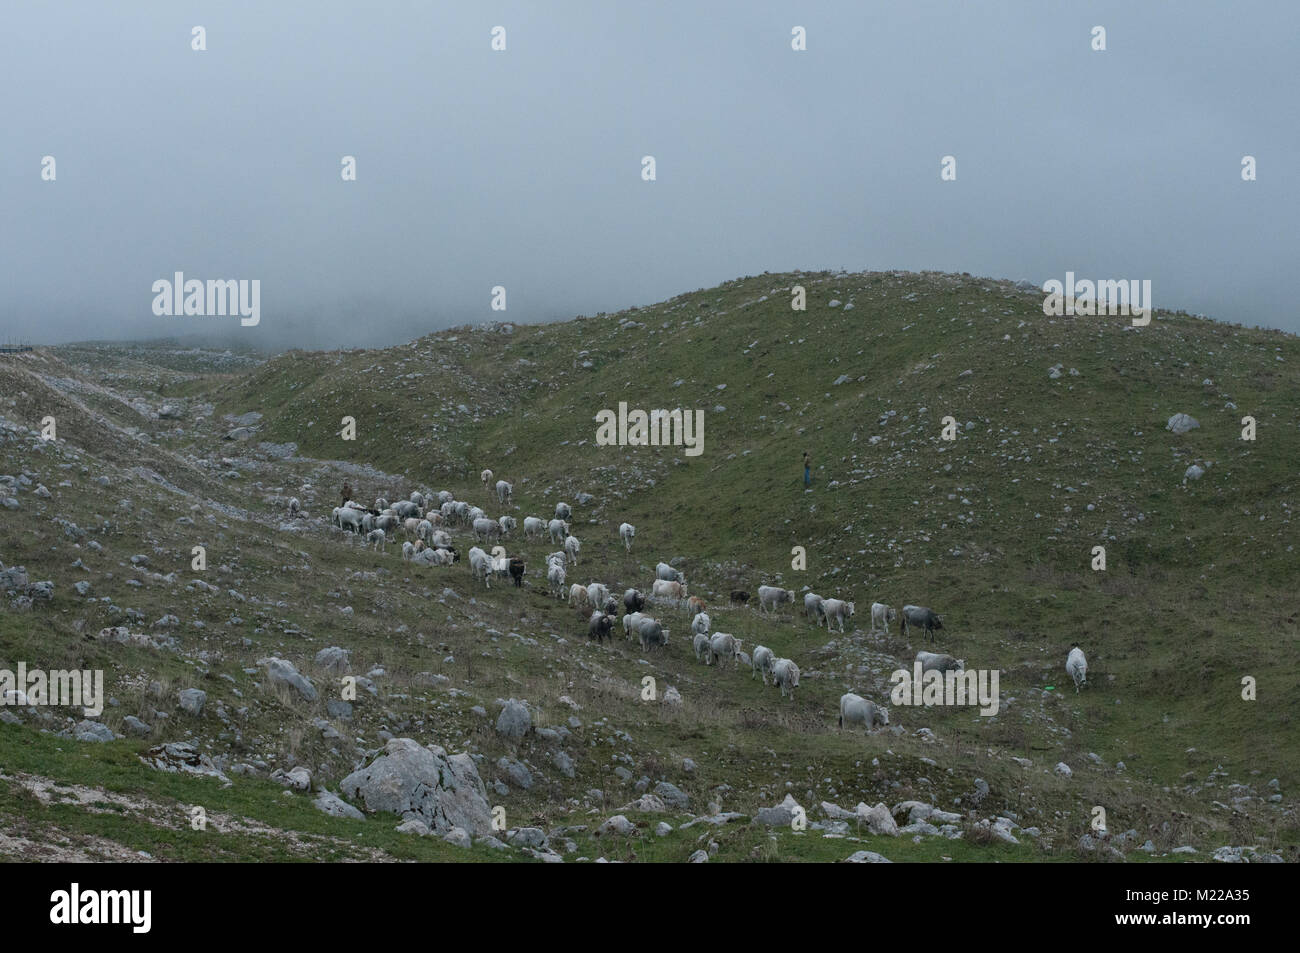 herd of cows during a foggy evening in campitello matese, san massimo, campobasso, molise Stock Photo